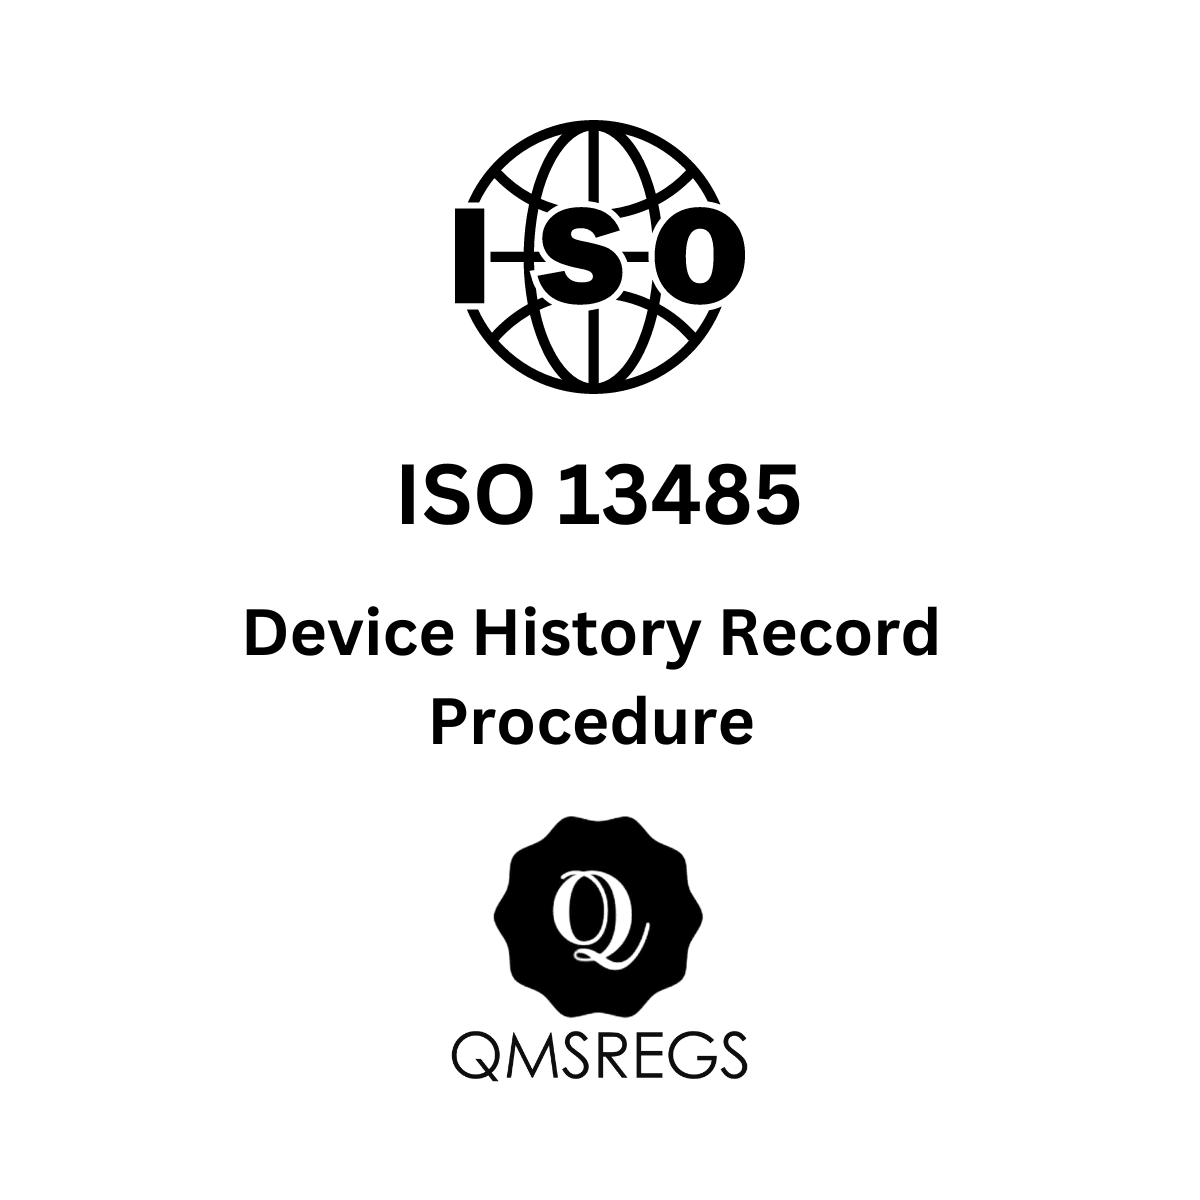 ISO 13485 Device History Record Procedure Template